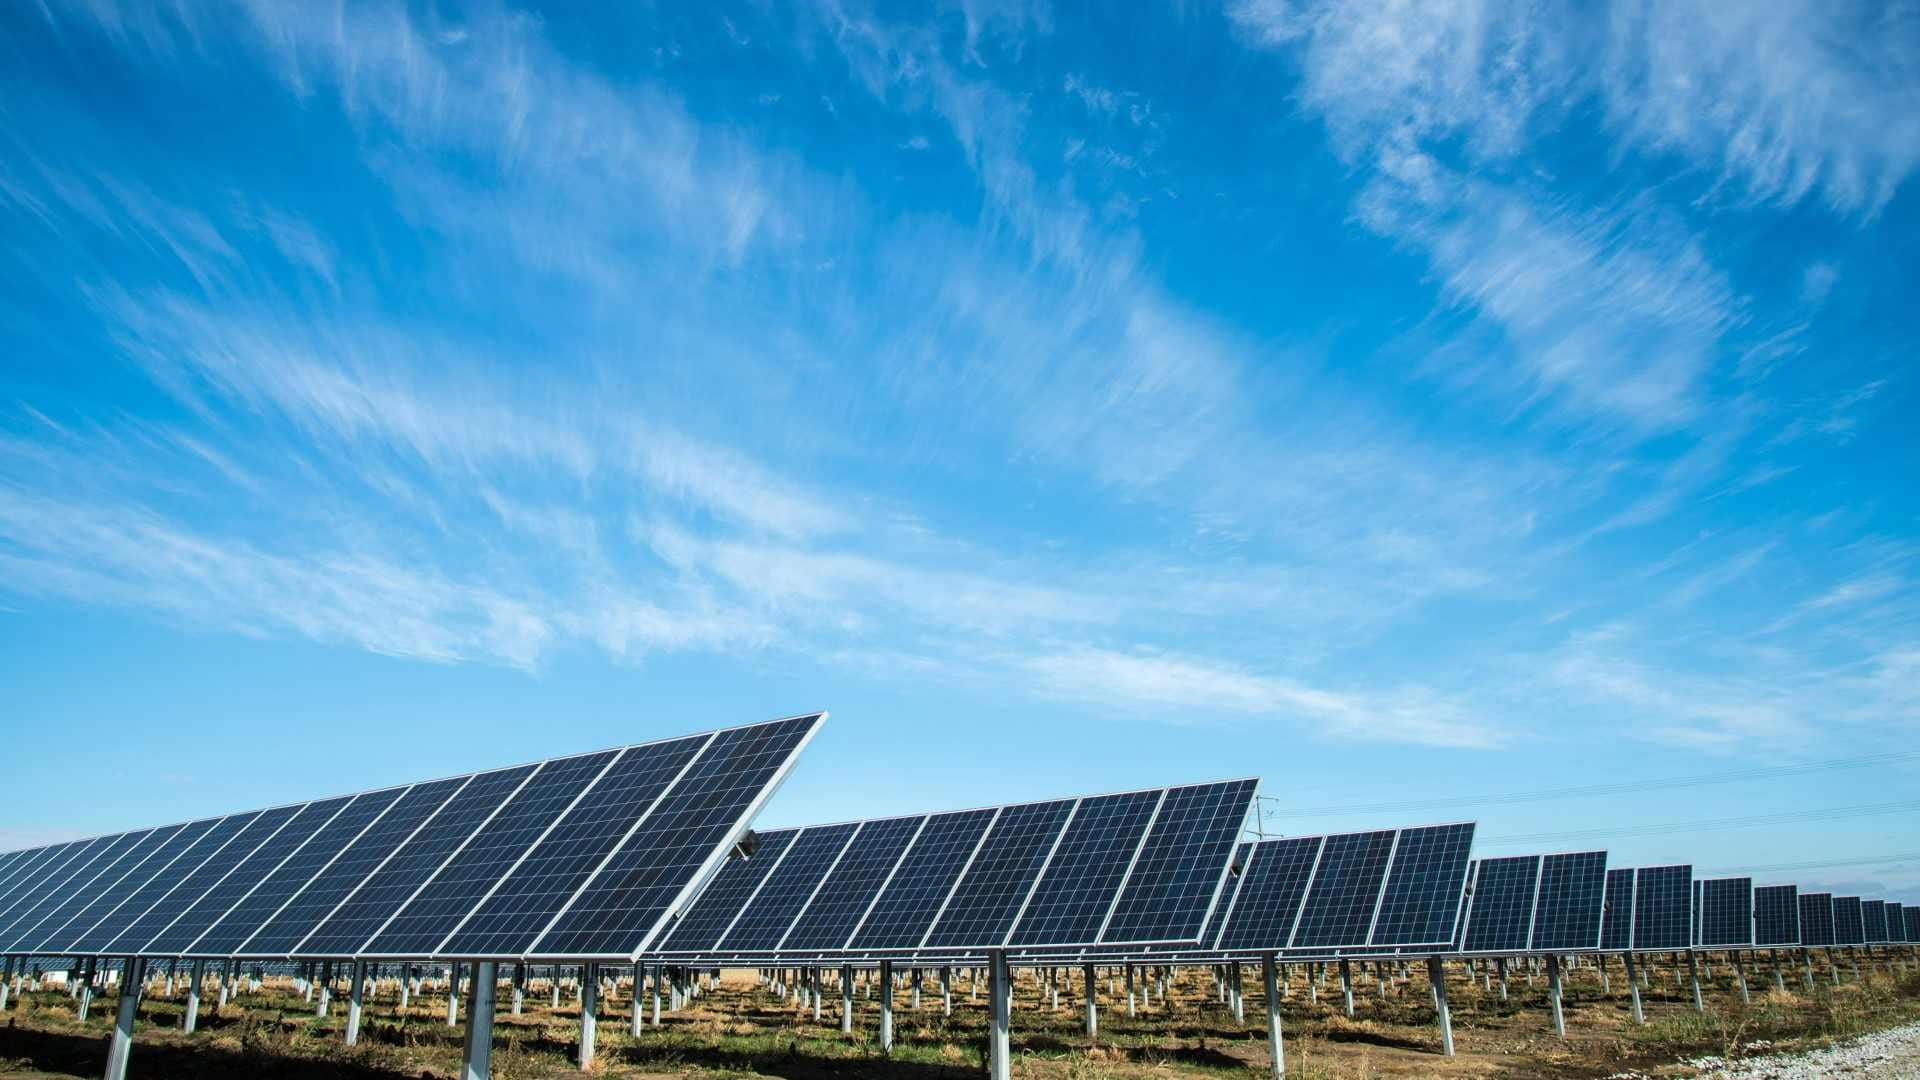 solar panels ground mounted over blue sky